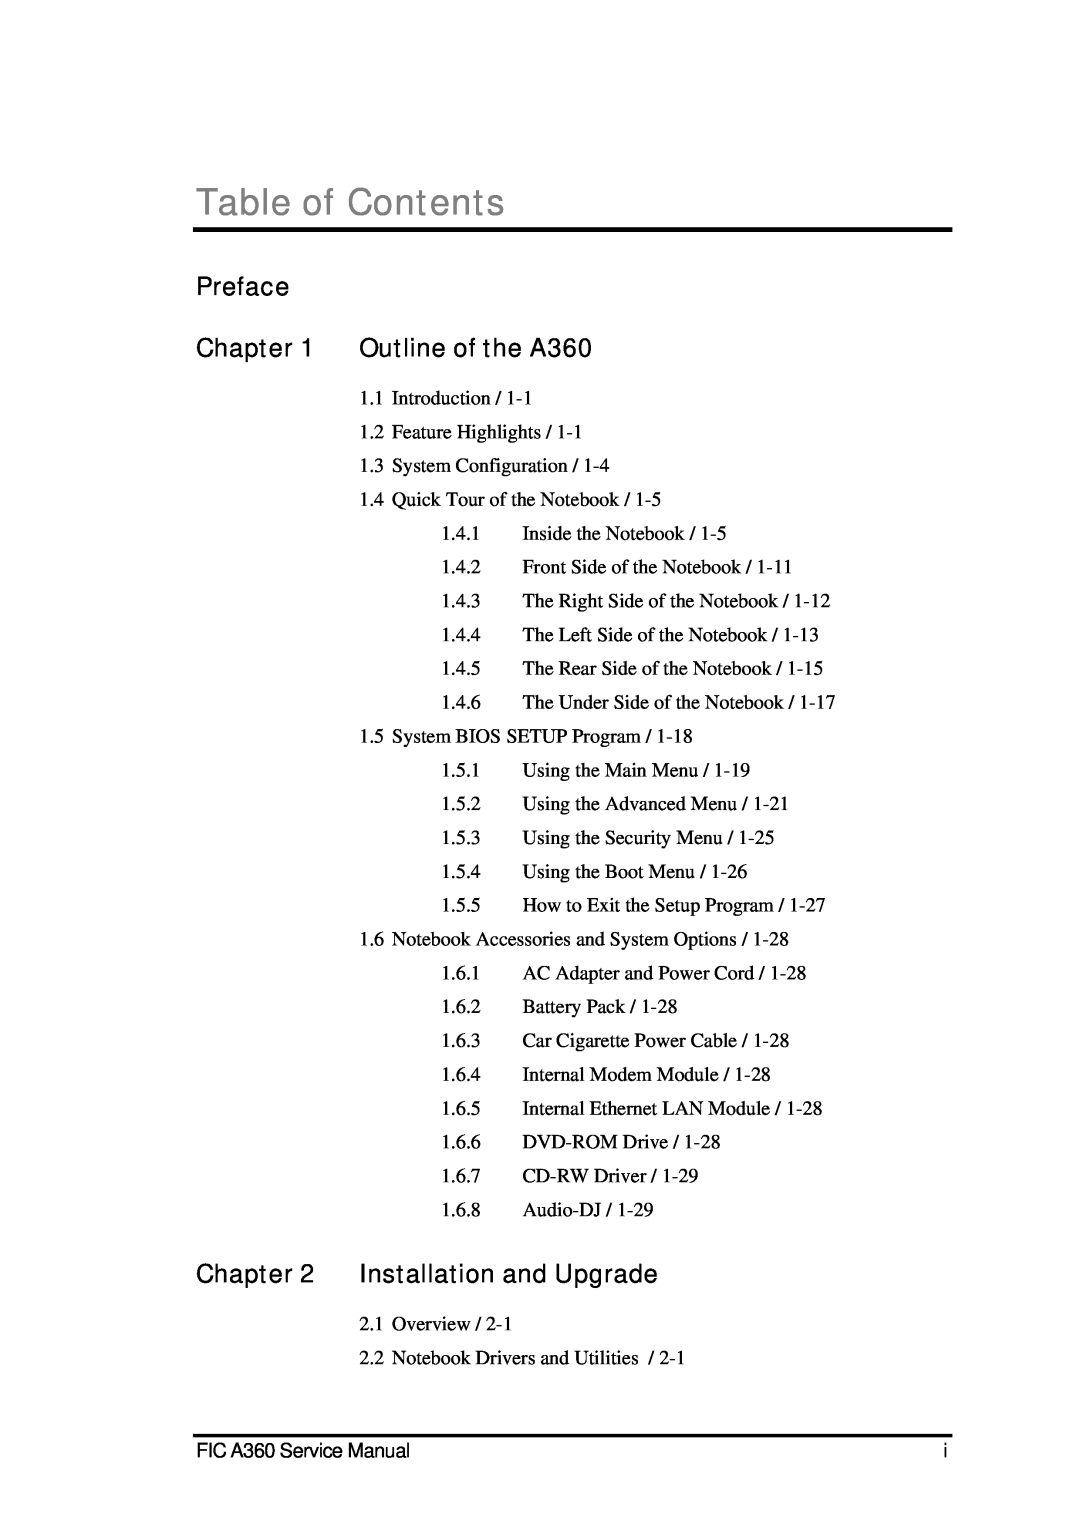 FIC service manual Table of Contents, Preface Outline of the A360, Installation and Upgrade 